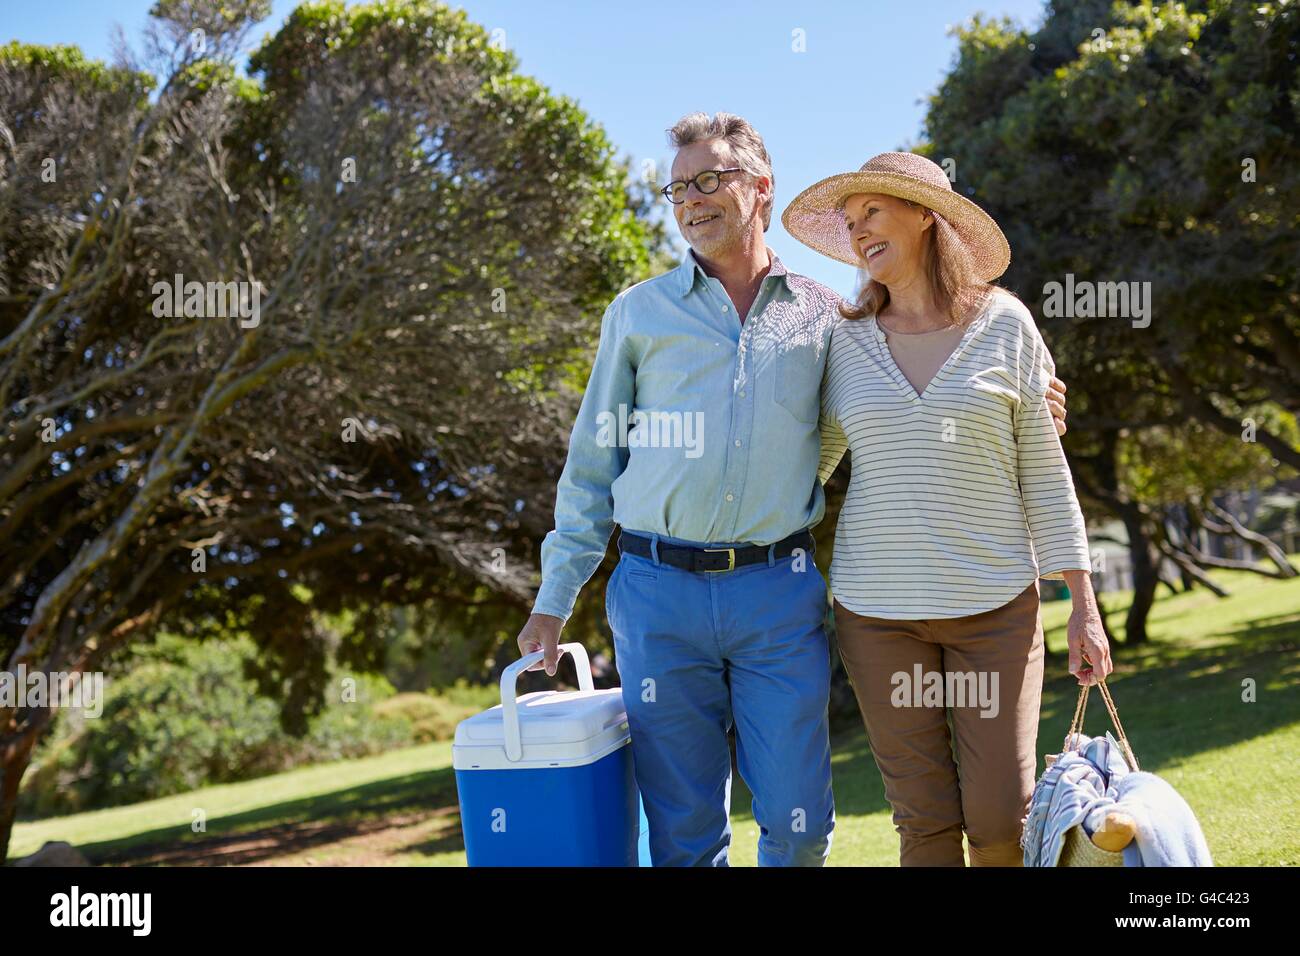 MODEL RELEASED. Senior couple with picnic hampers. Stock Photo